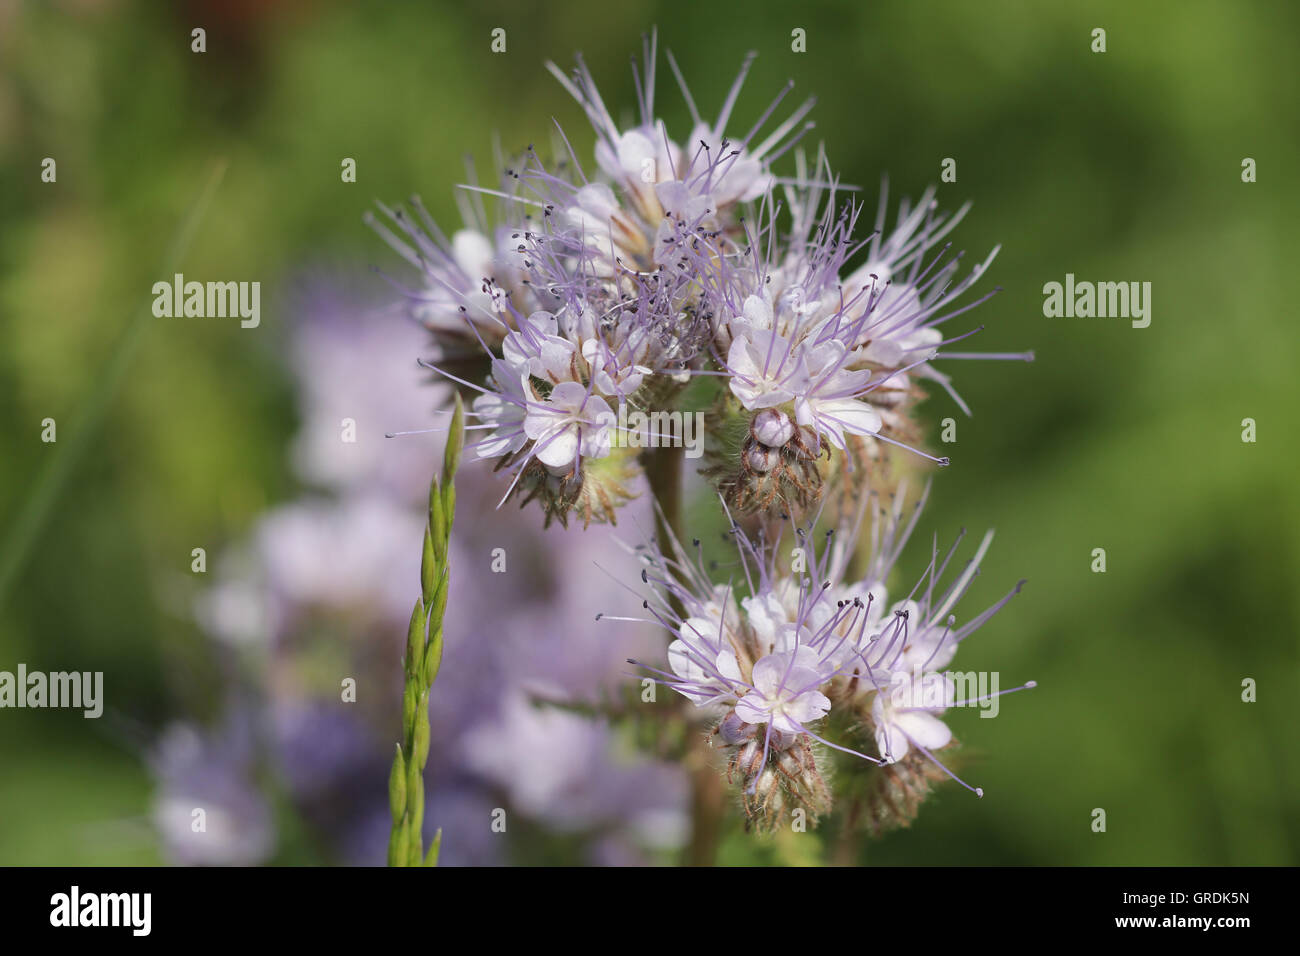 Lacy Phacelia, Phacelia Tanacetifolia, Green Manure And Food Source For Bees And Other Insects Stock Photo